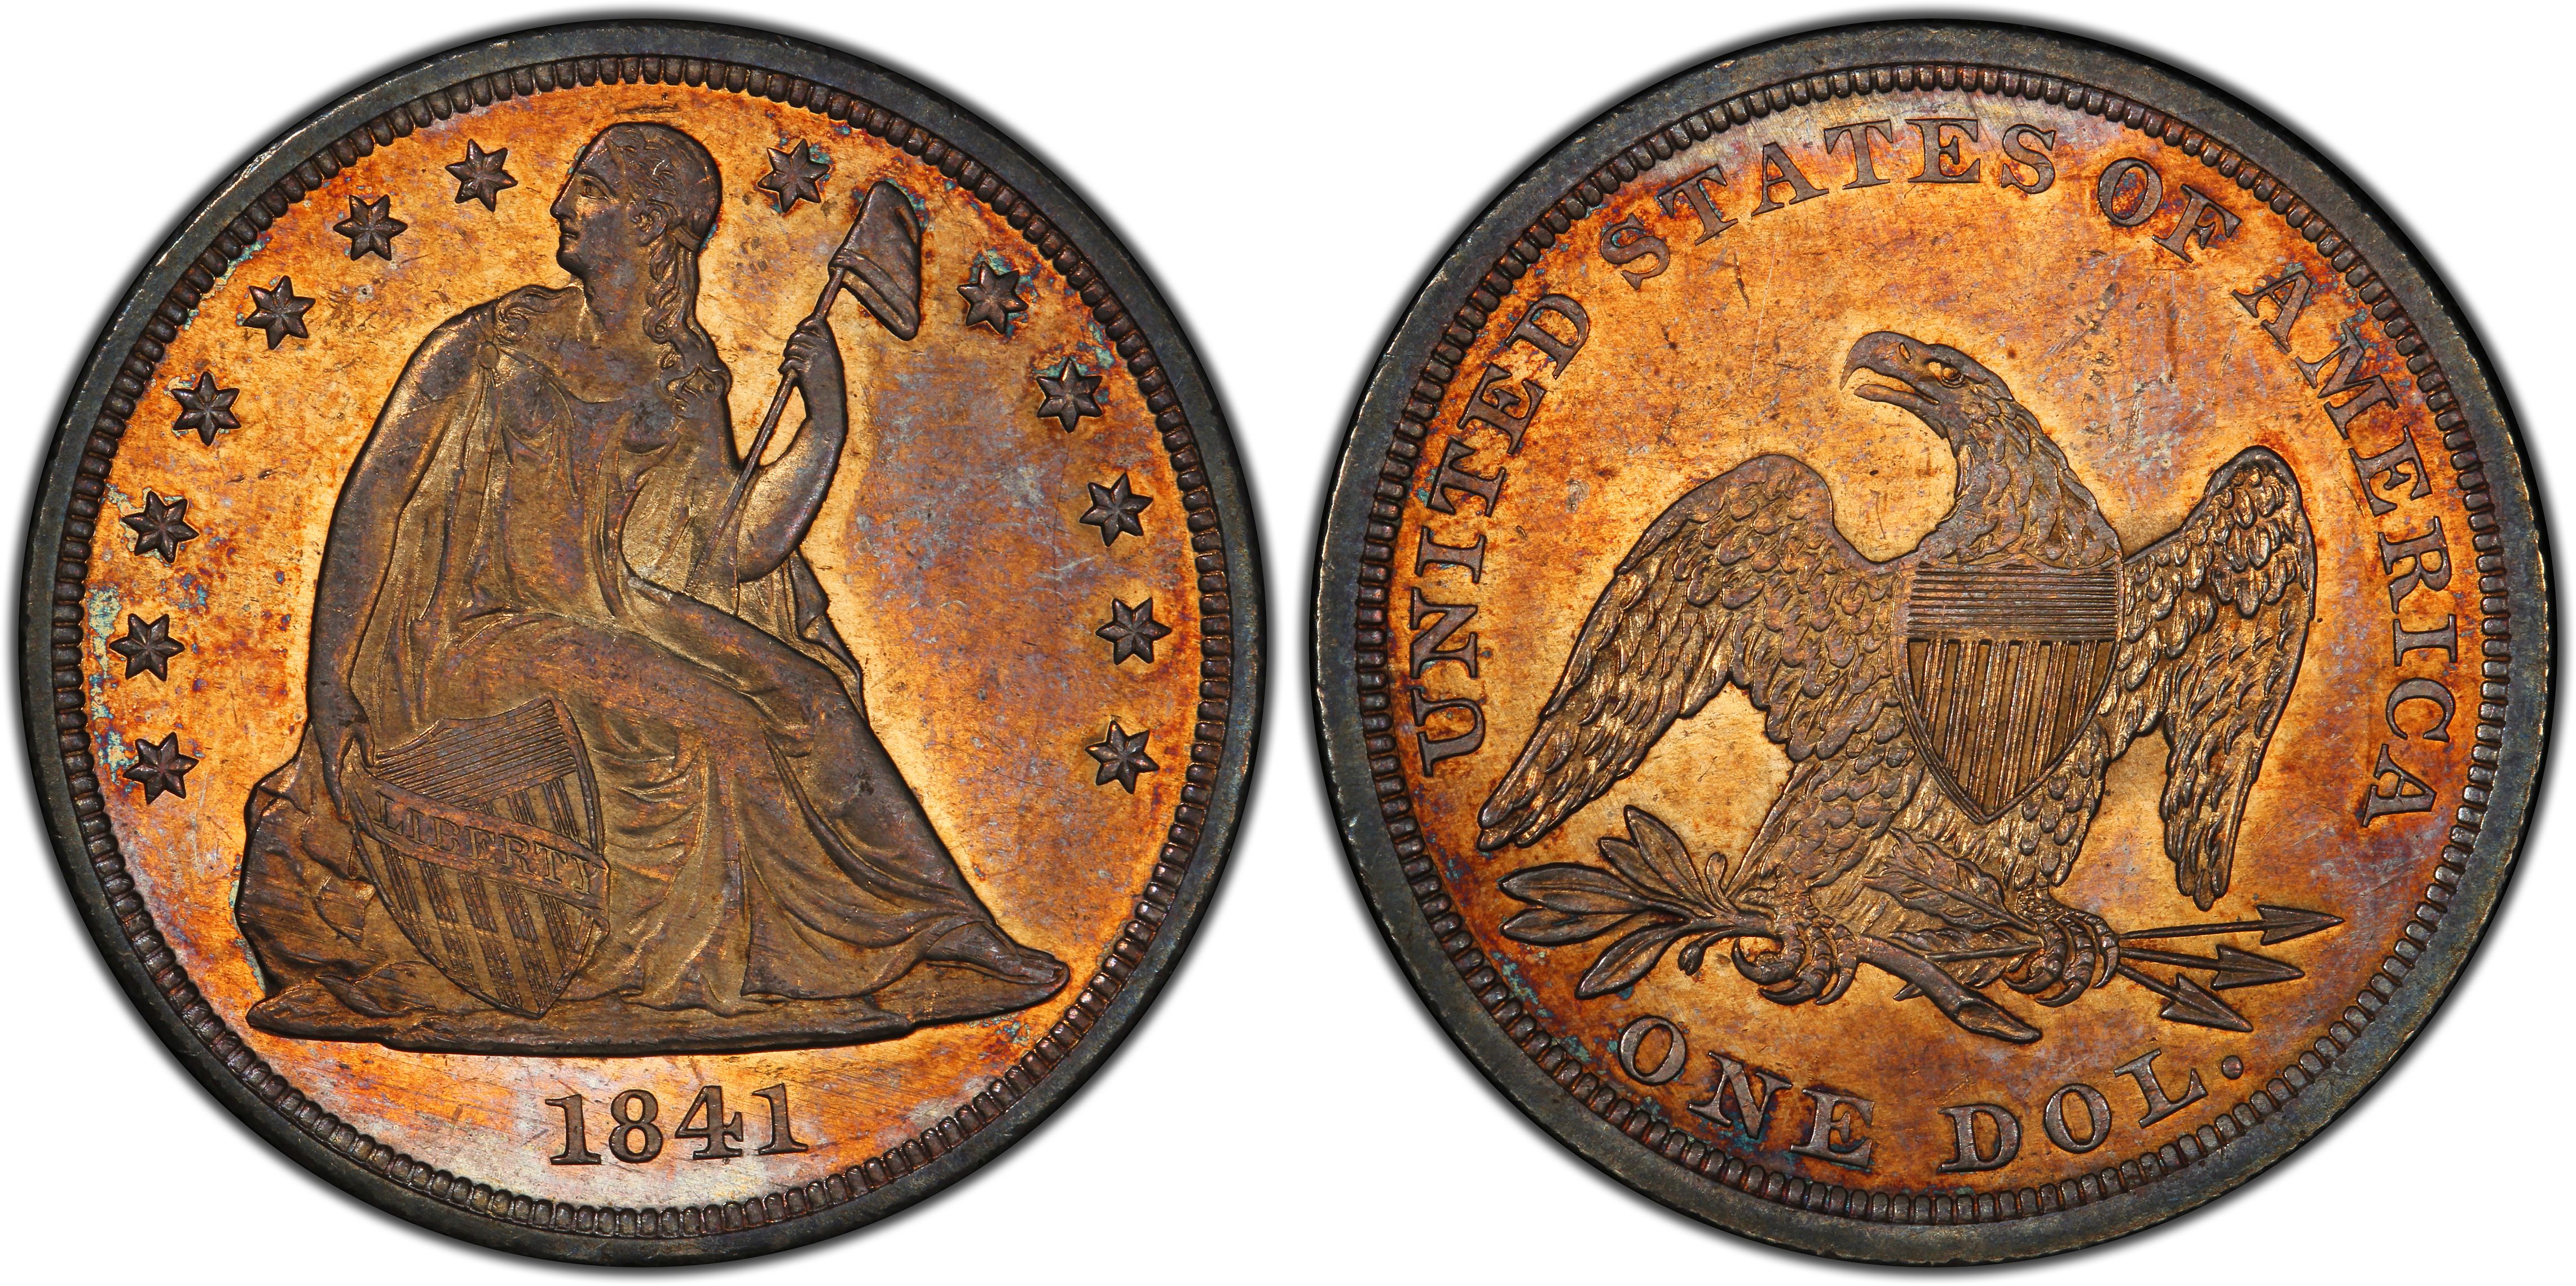 1841 $1 (Regular Strike) Liberty Seated Dollar - PCGS CoinFacts